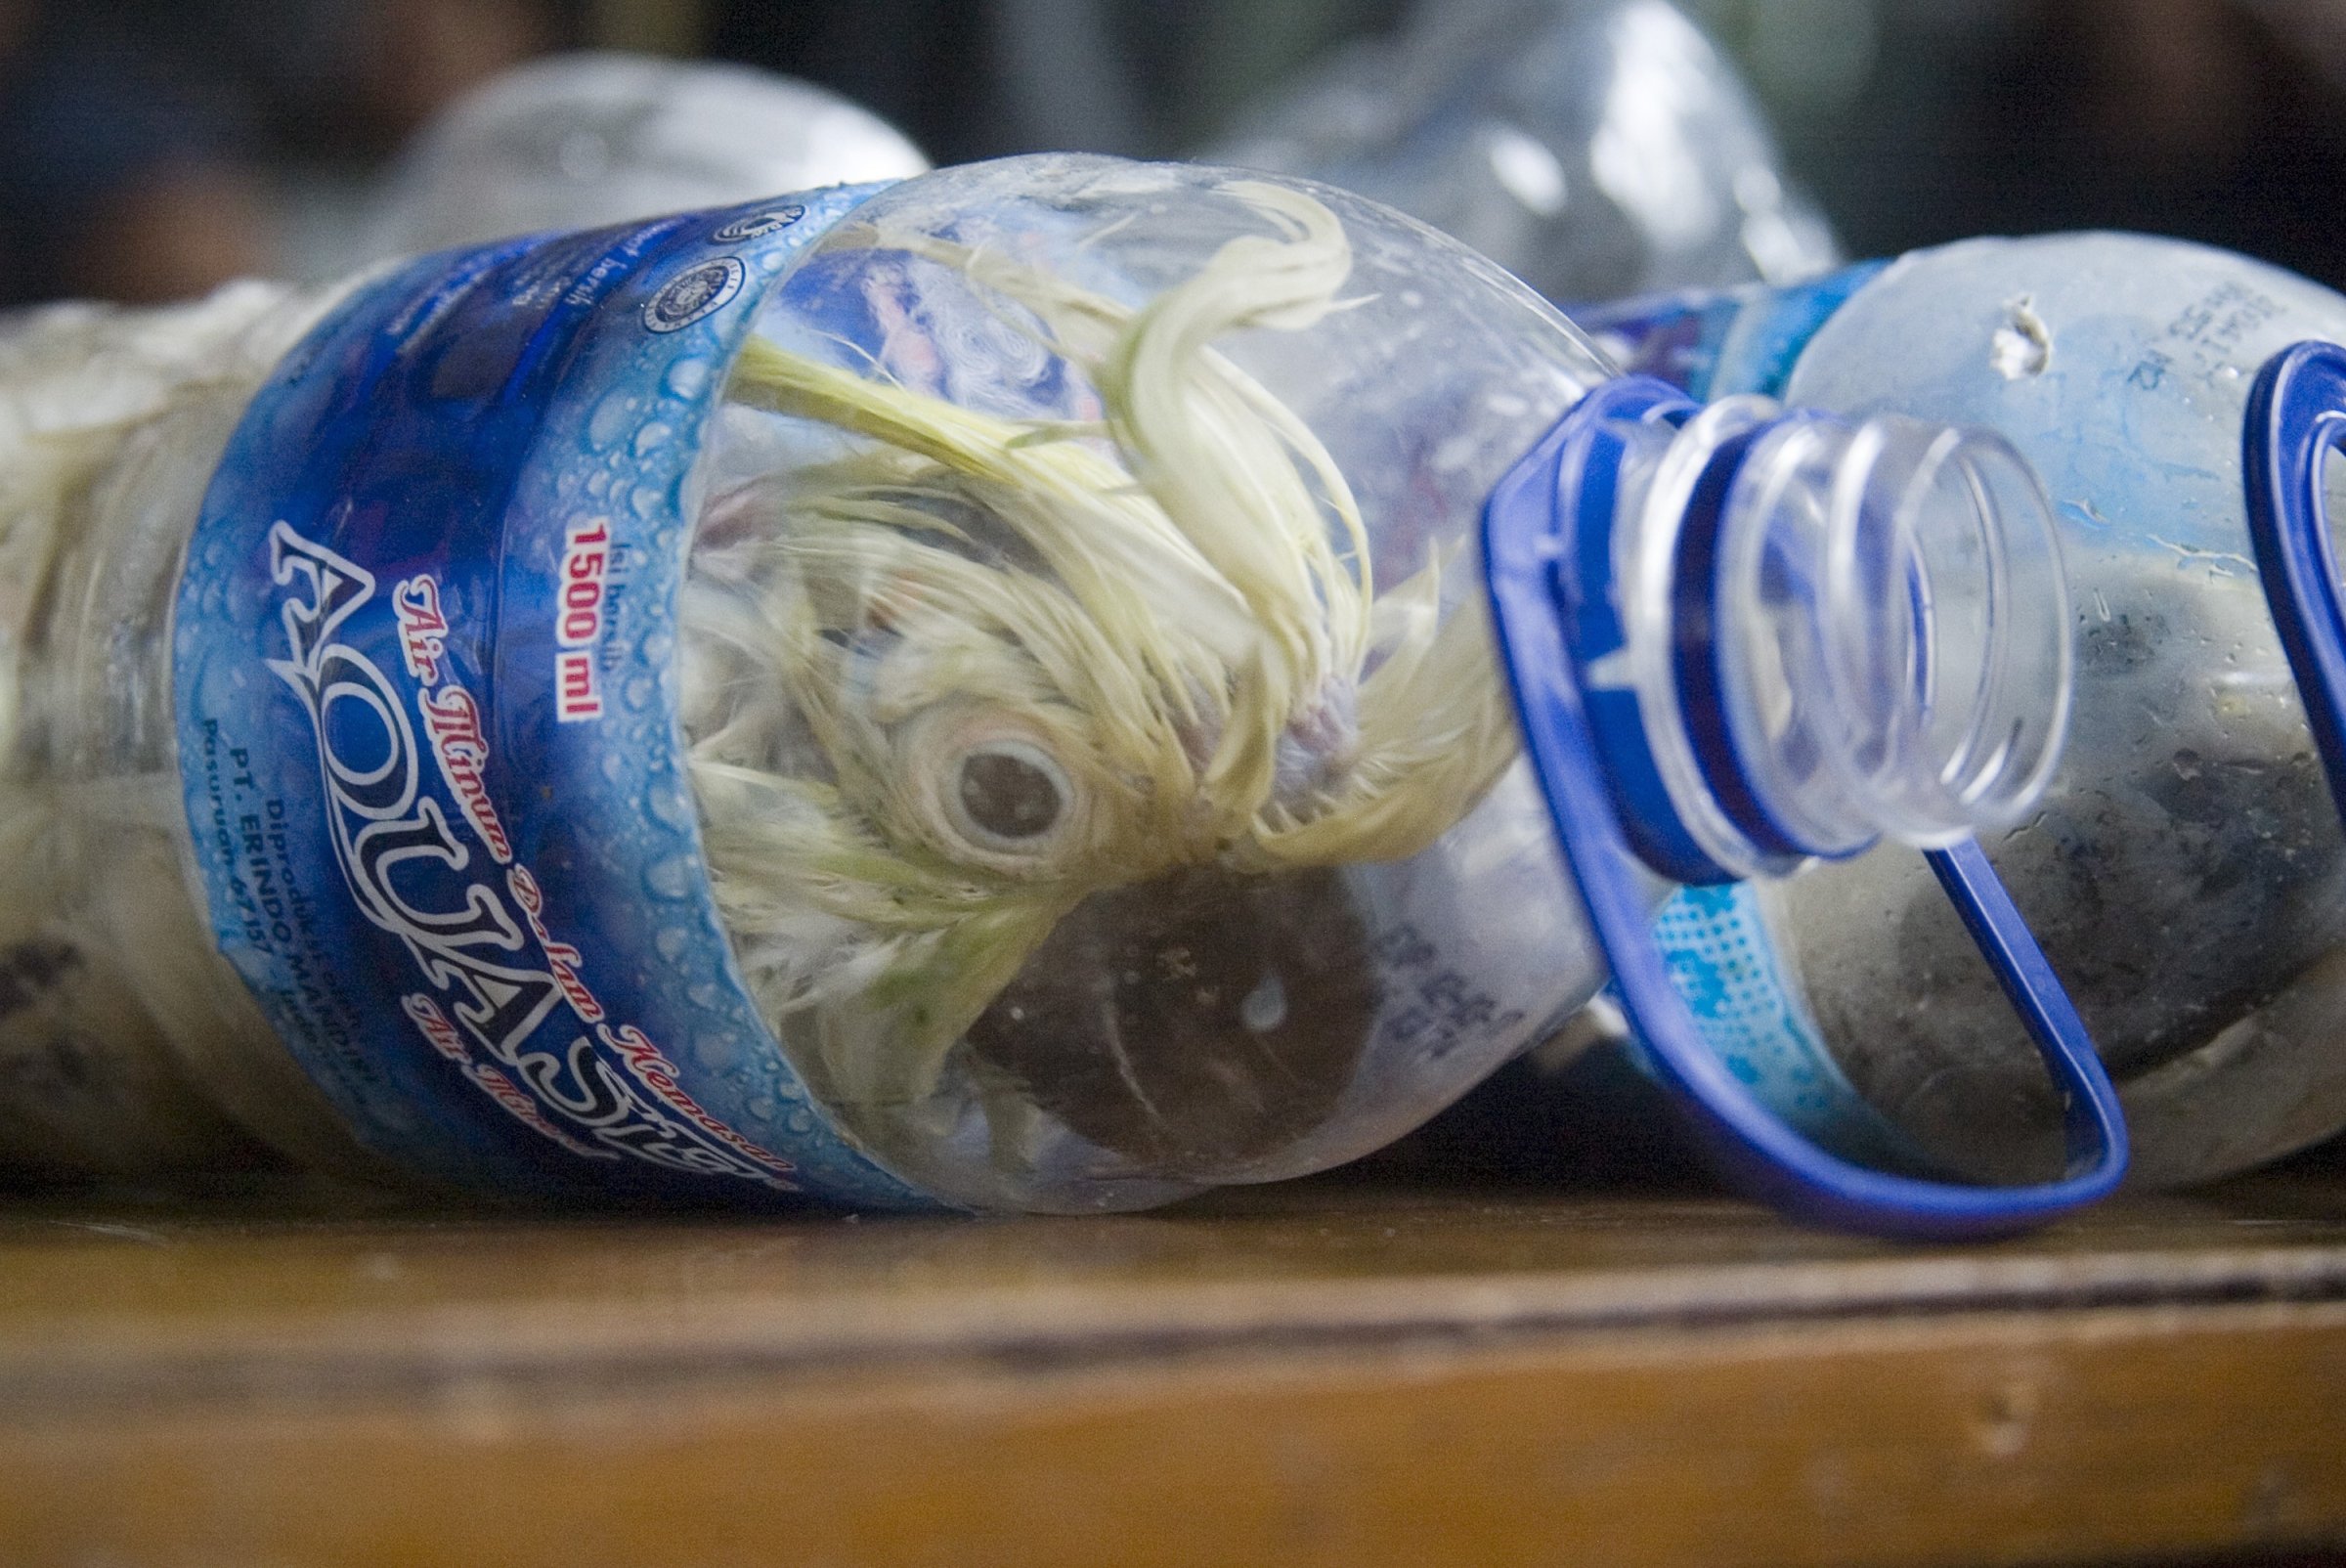 Cacatua sulphurea that was successfully secured from illegal wildlife trading is seen into an empty bottle in Surabaya, East Java, Indonesia